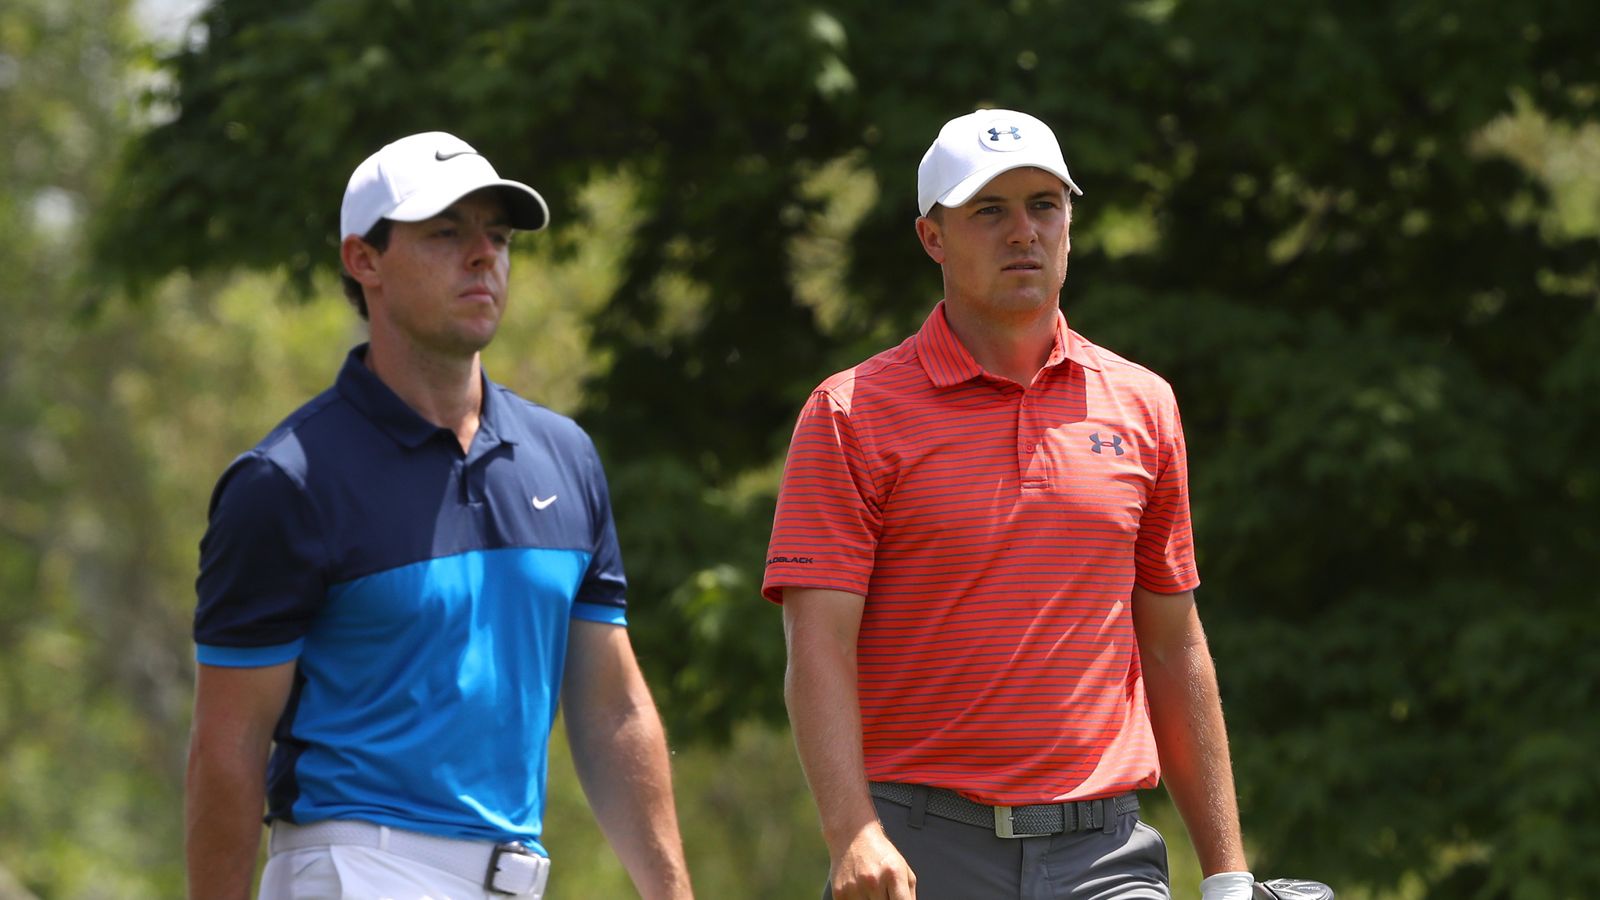 Rory McIlroy and Jordan Spieth leap into contention at Memorial | Golf ...